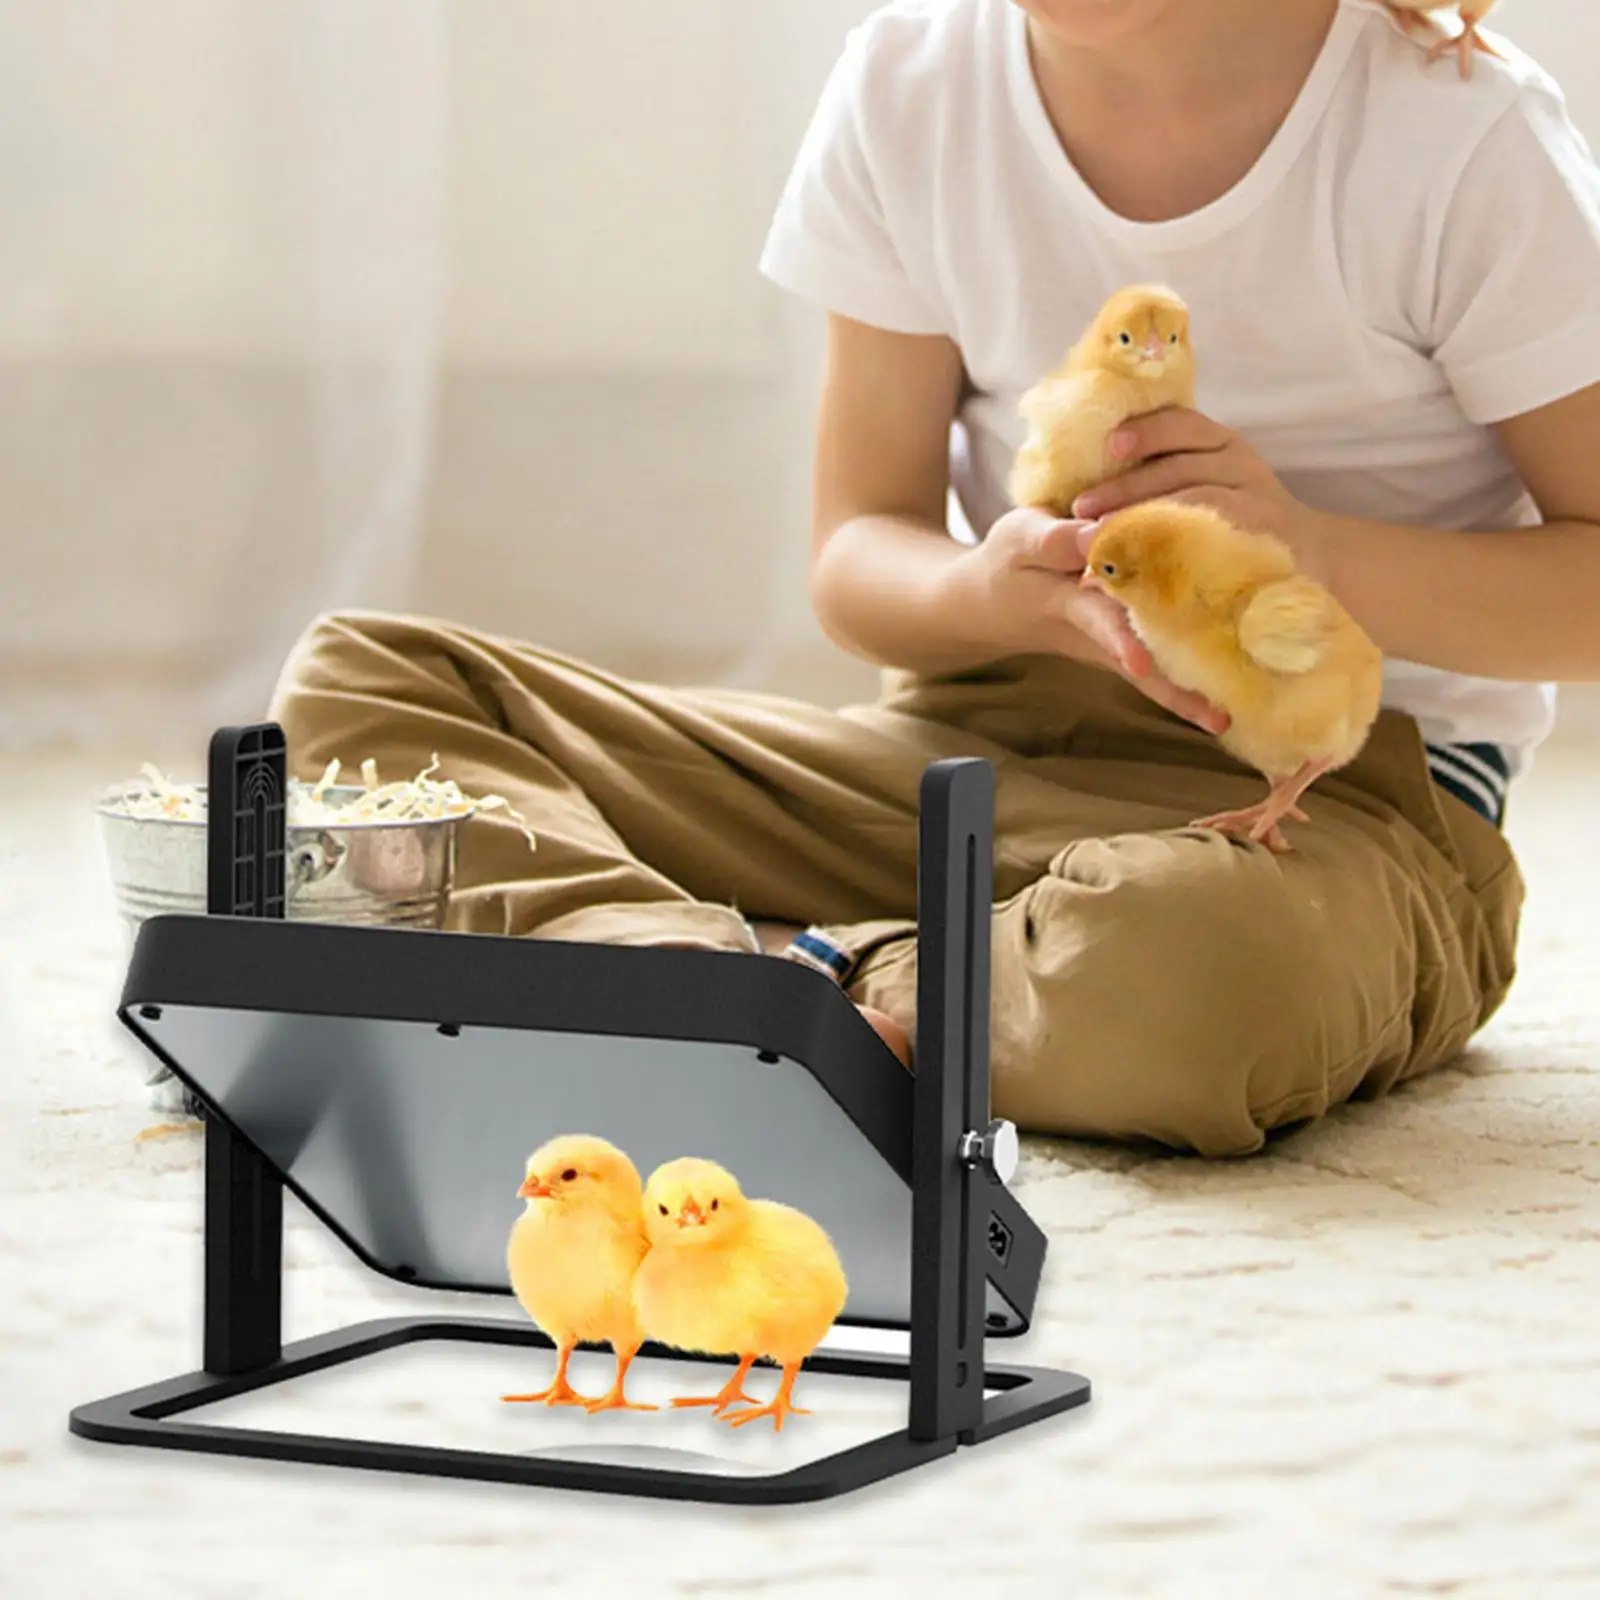 Chick Brooder Heating Board Adjustable Height Angle Hen Pet Supplies Incubator Breeding Keeping Warm for Chicken Hen Poultry